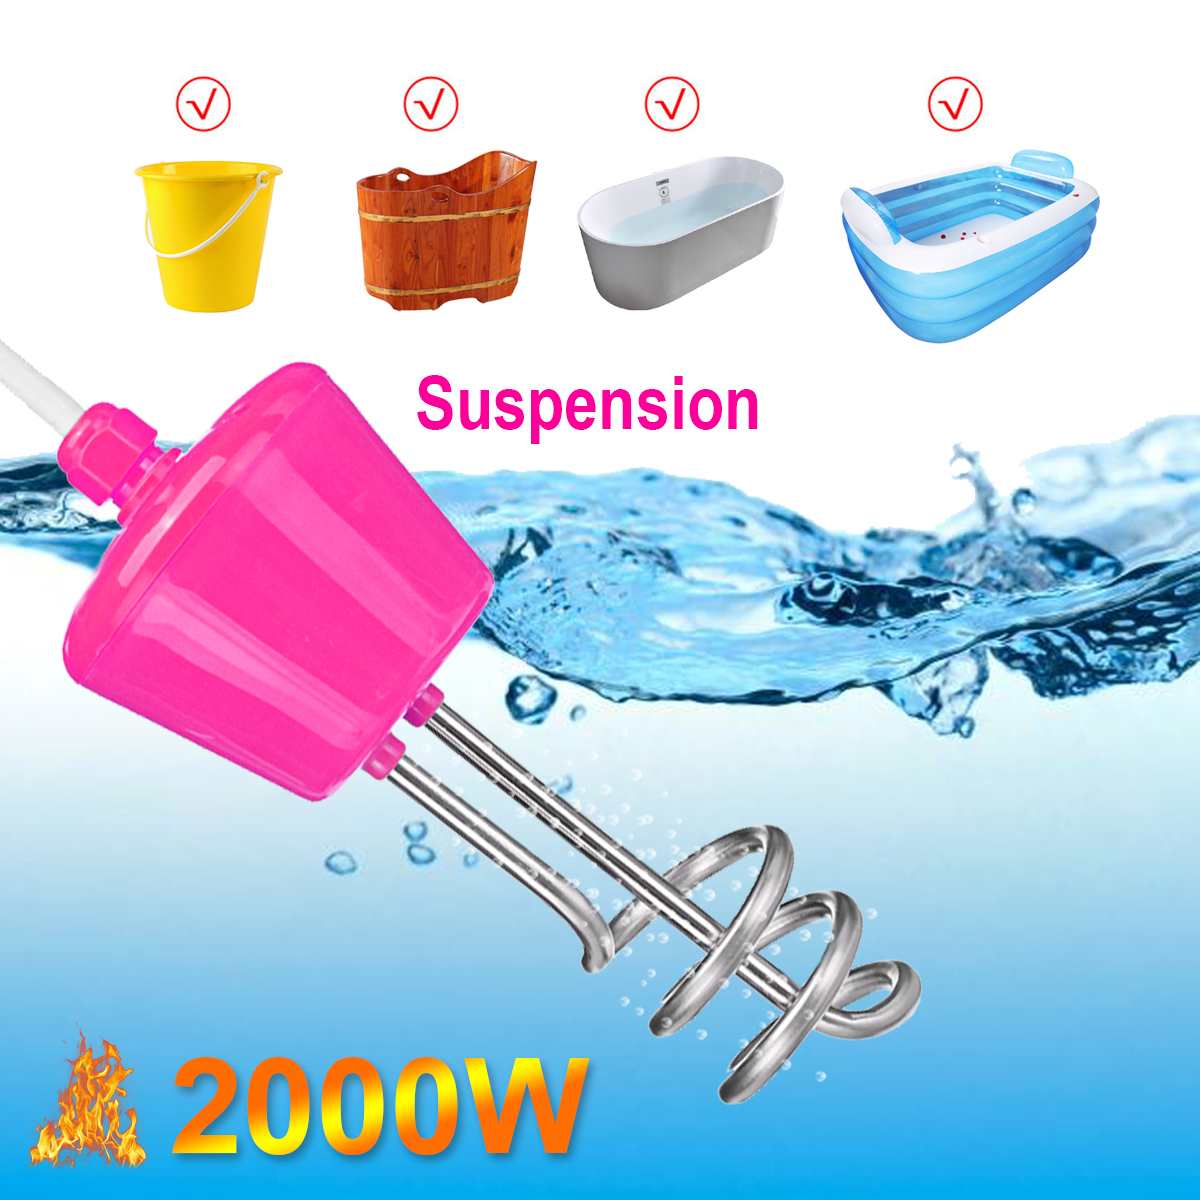 2000W Portable Suspension Stainless Steel Electric Floating Immersion Heater Boiler Water Heating Element For Camping Travel